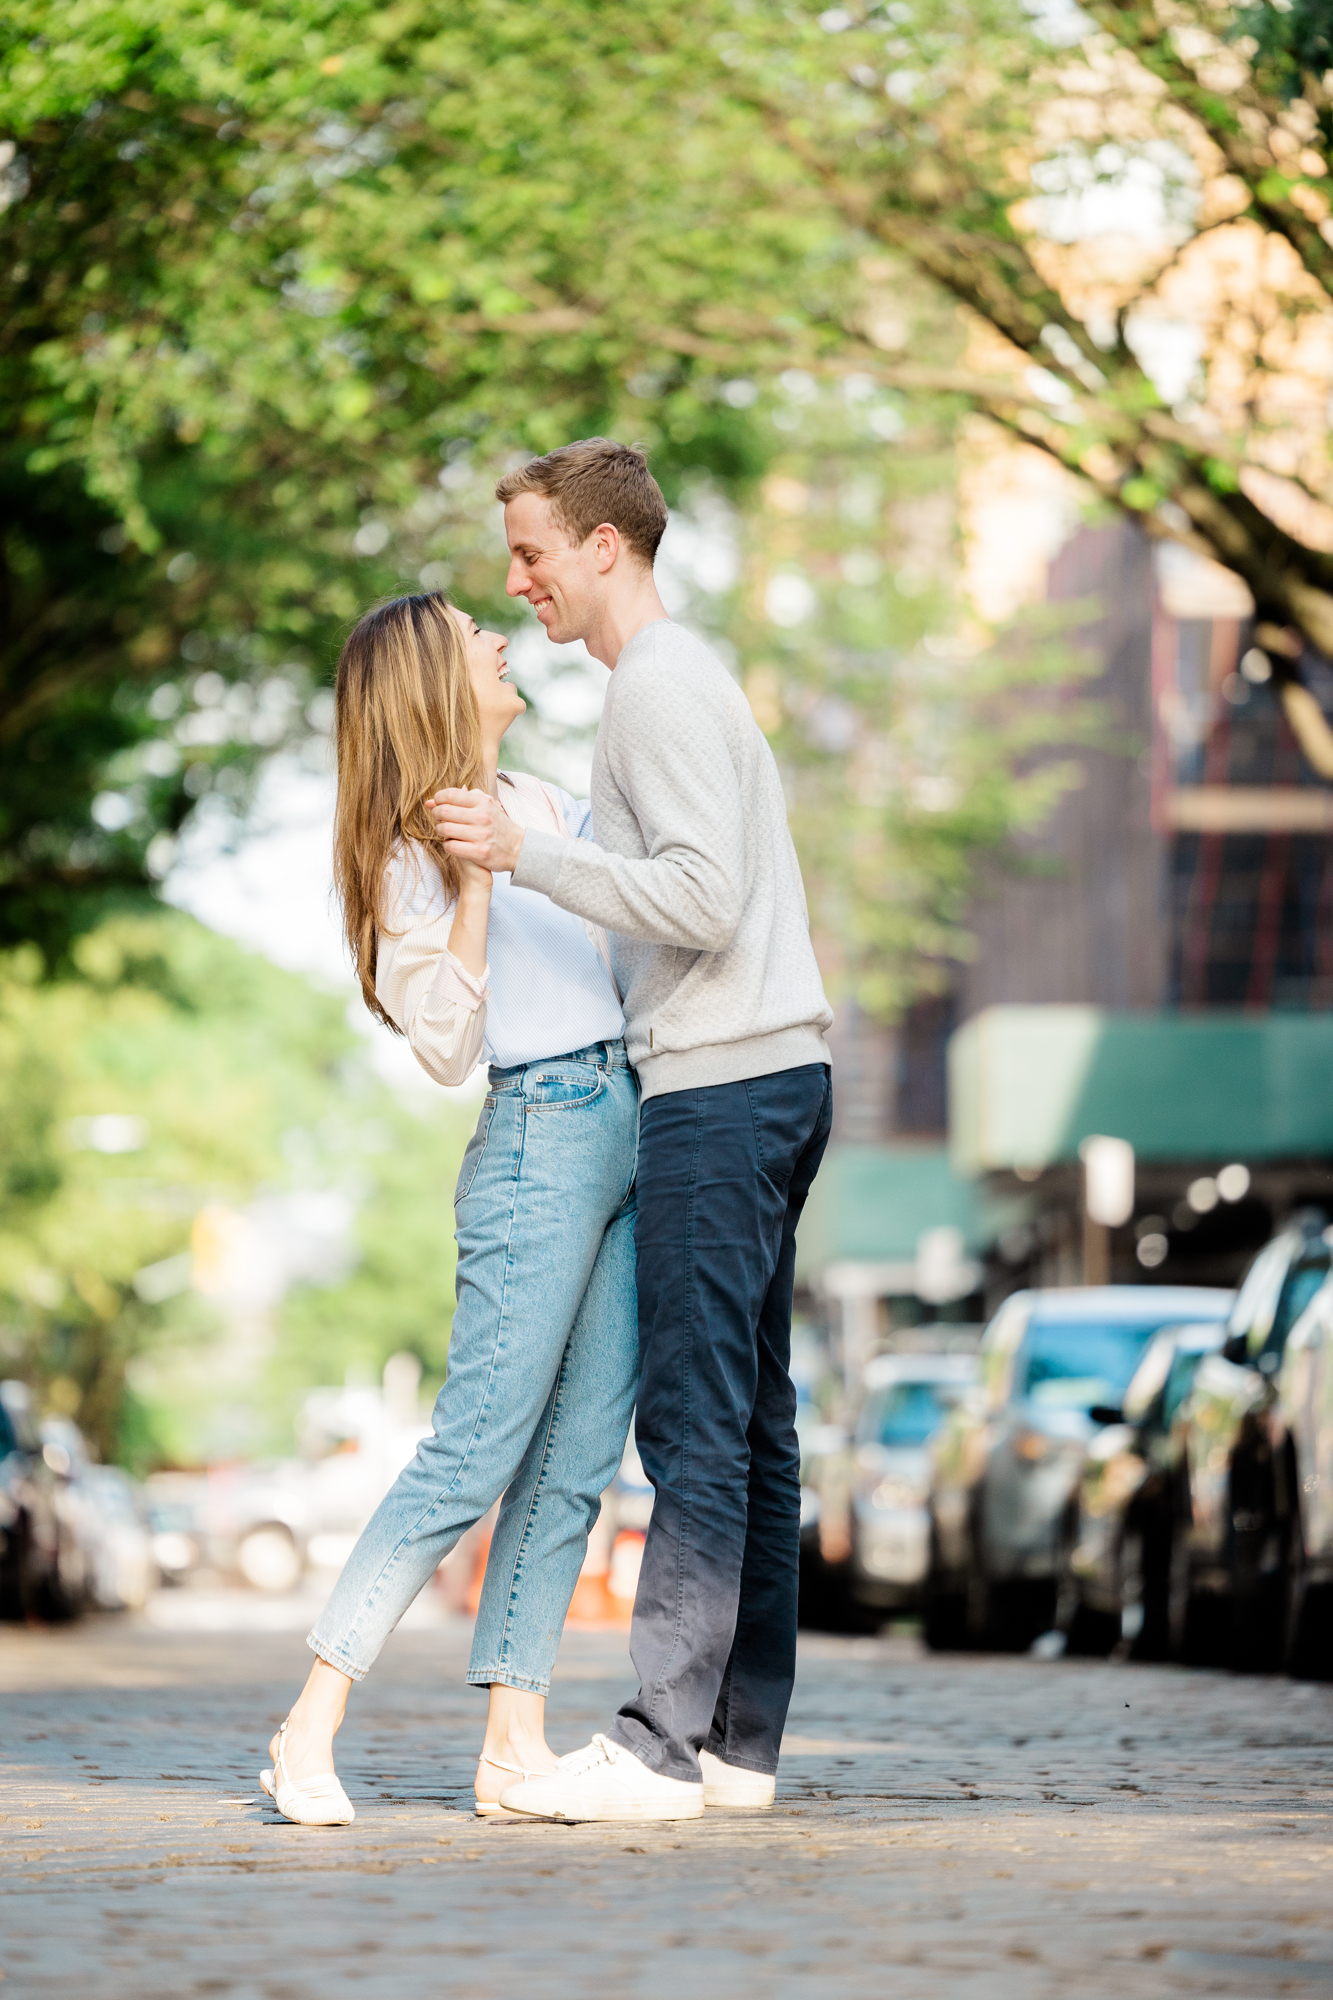 Flawless Summer Engagement Photography in the West Village